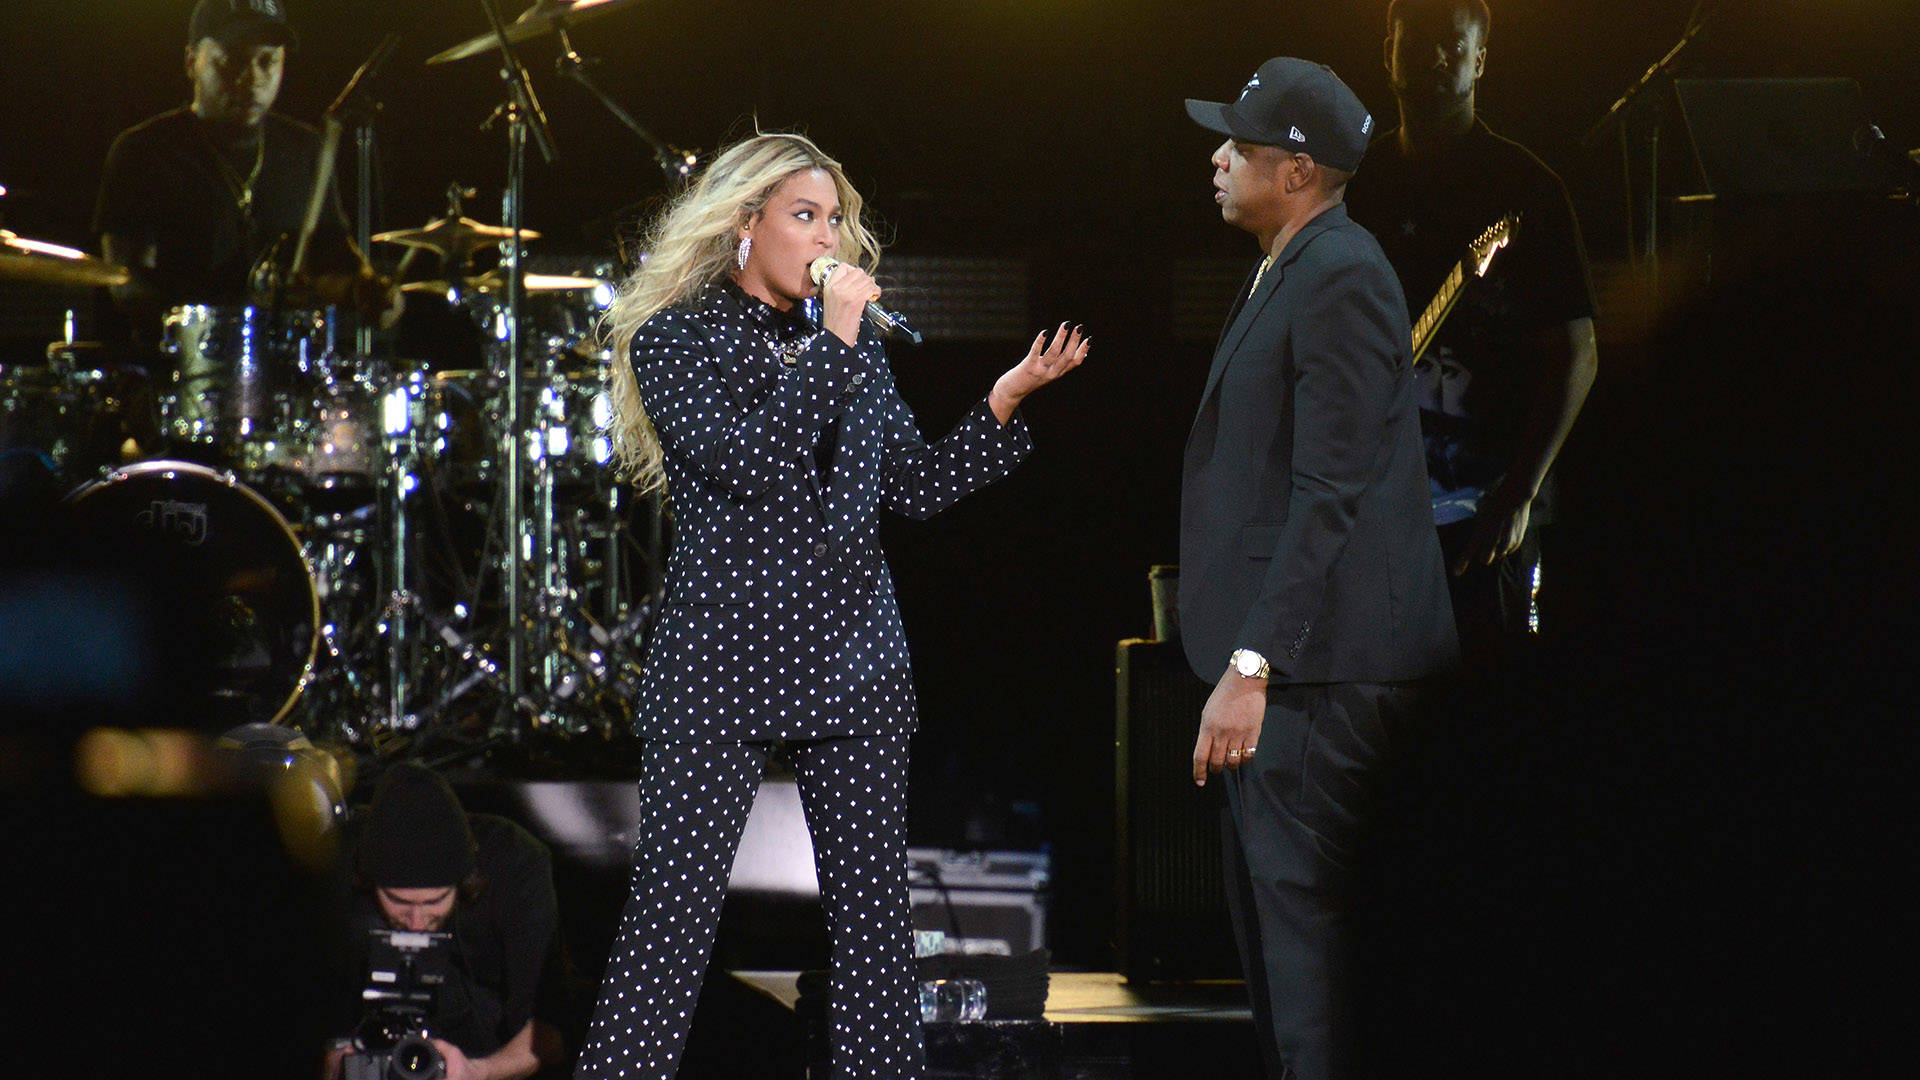 Beyonce and and Jay Z perform on stage during a Get Out The Vote concert in support of Hillary Clinton at Wolstein Center on November 4, 2016 in Cleveland, Ohio.  Duane Prokop/Getty Images